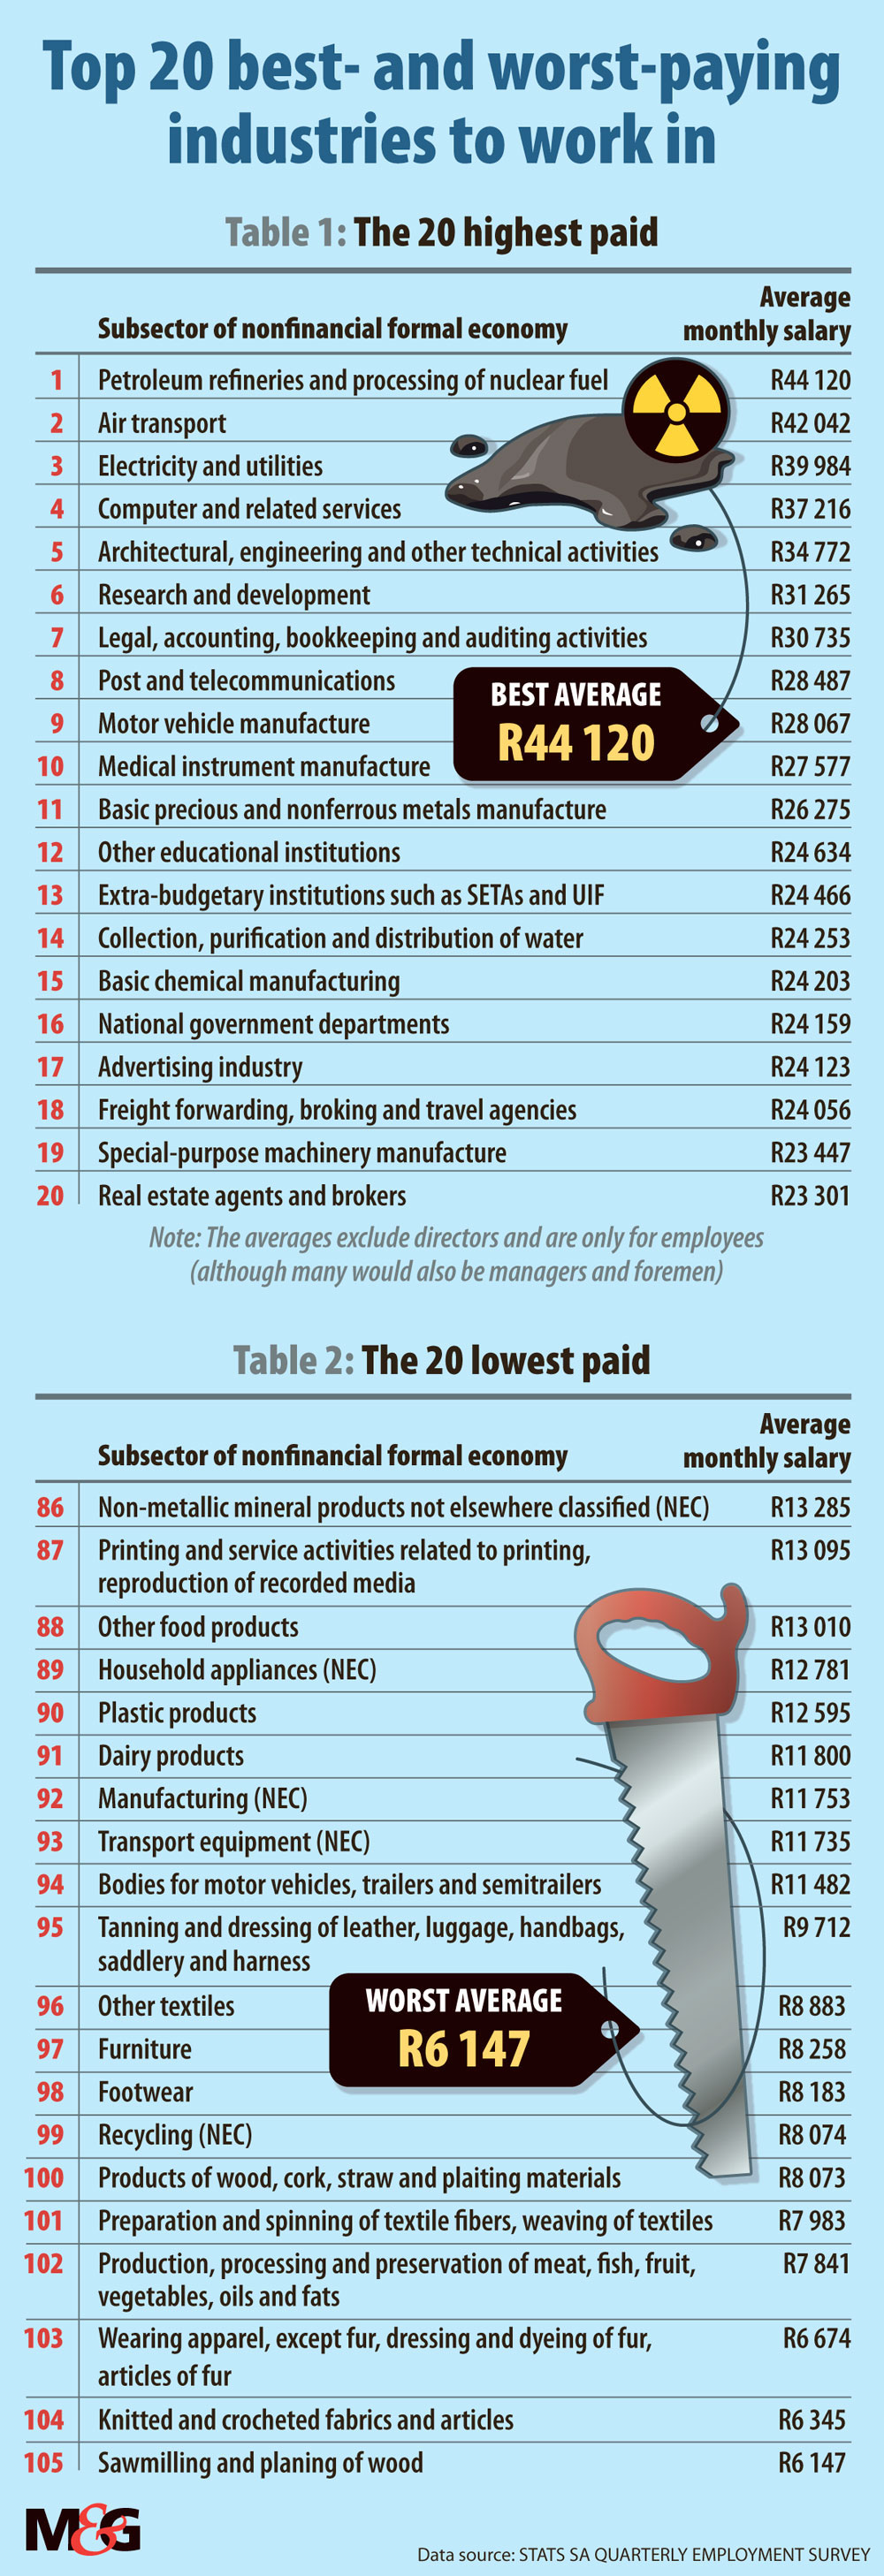 Top 20 best and worst paying industries